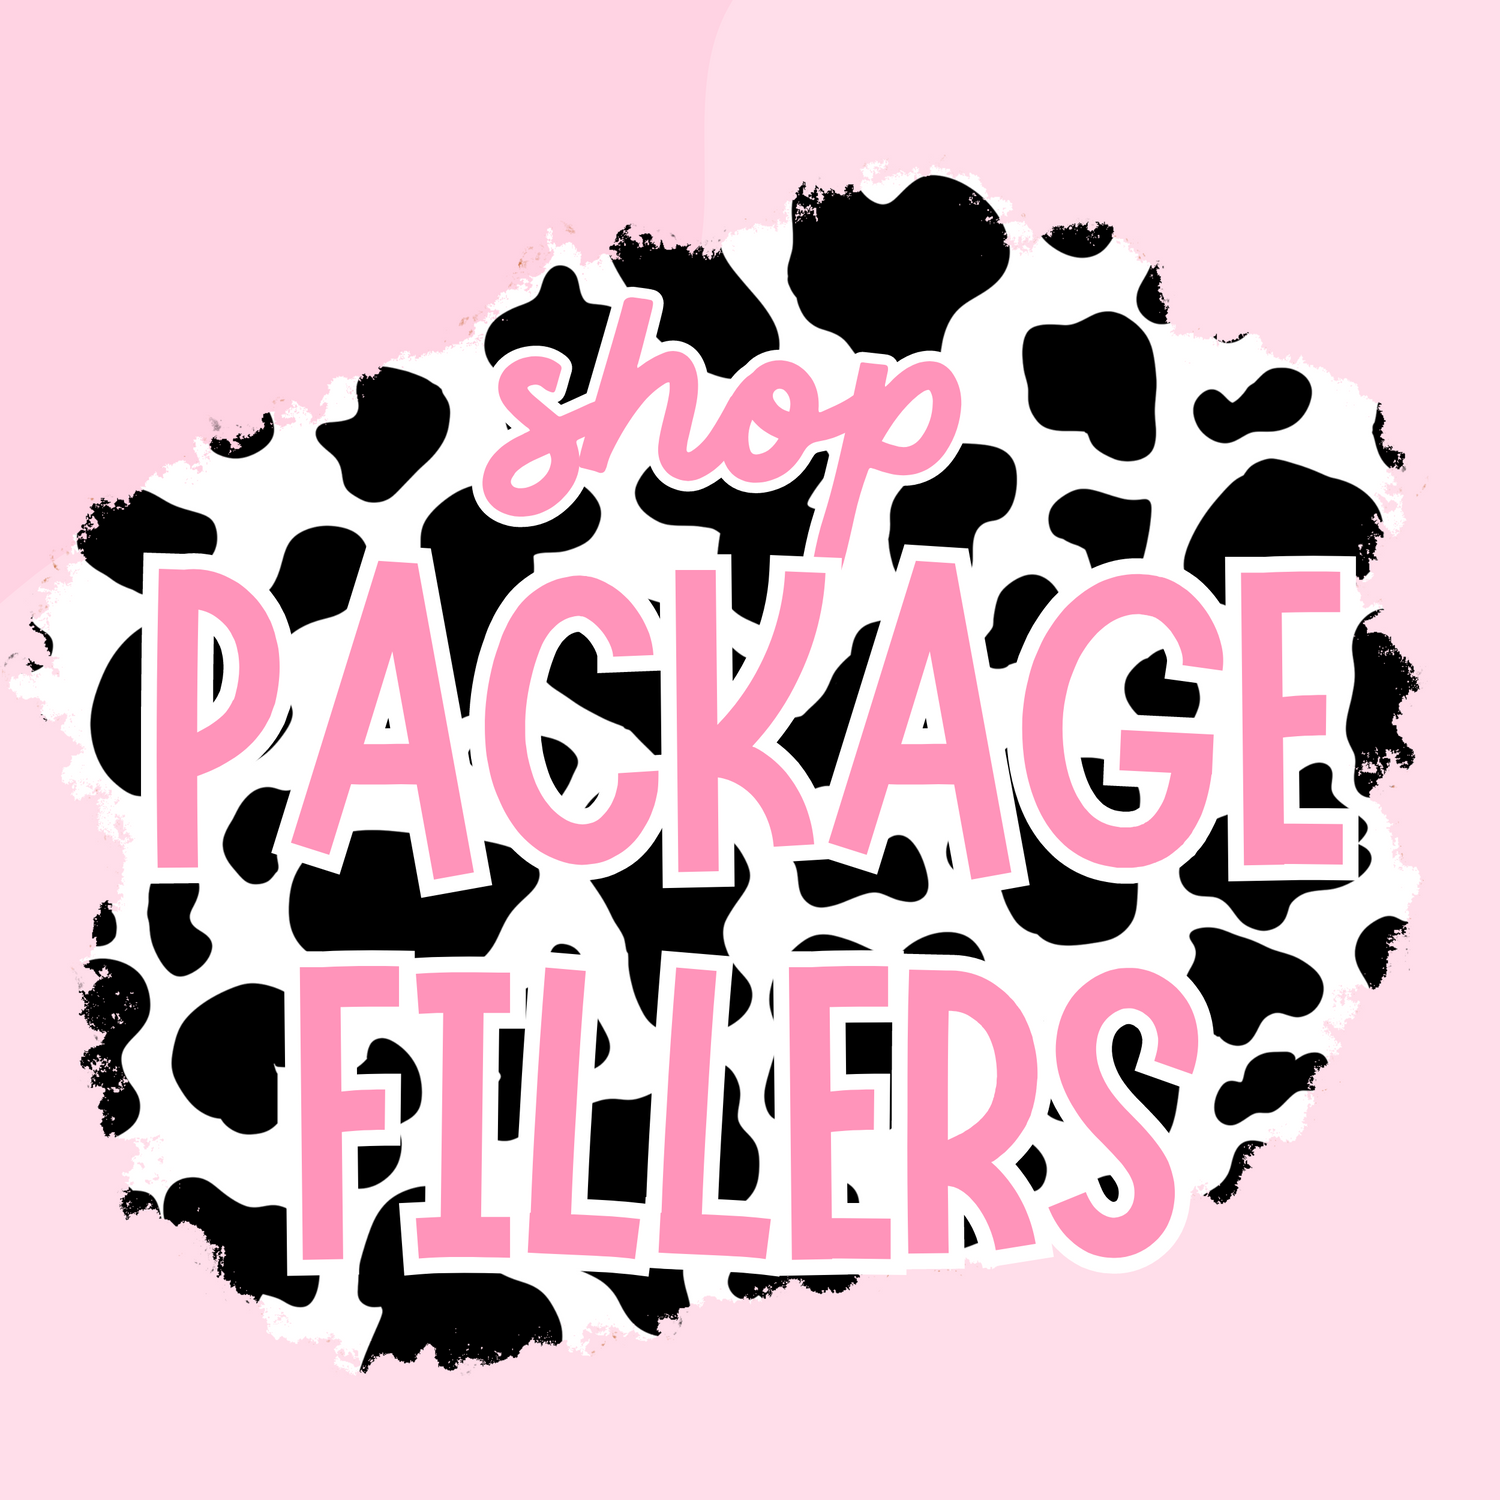 ALL PACKAGE FILLERS